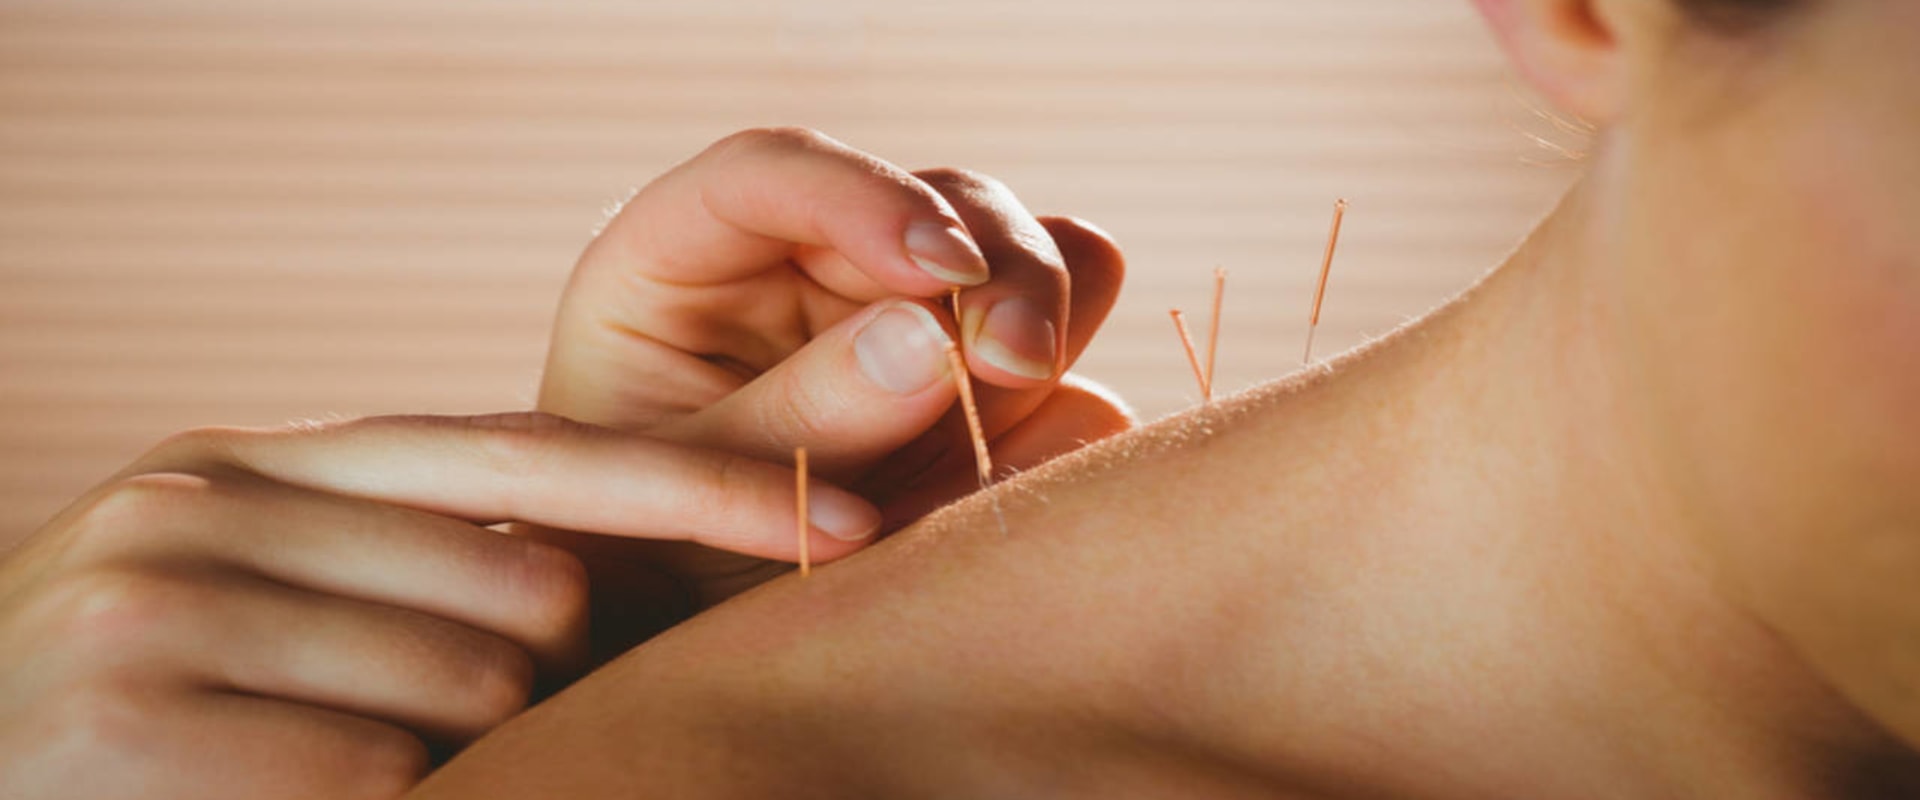 What Should You Do and Not Do After Acupuncture?